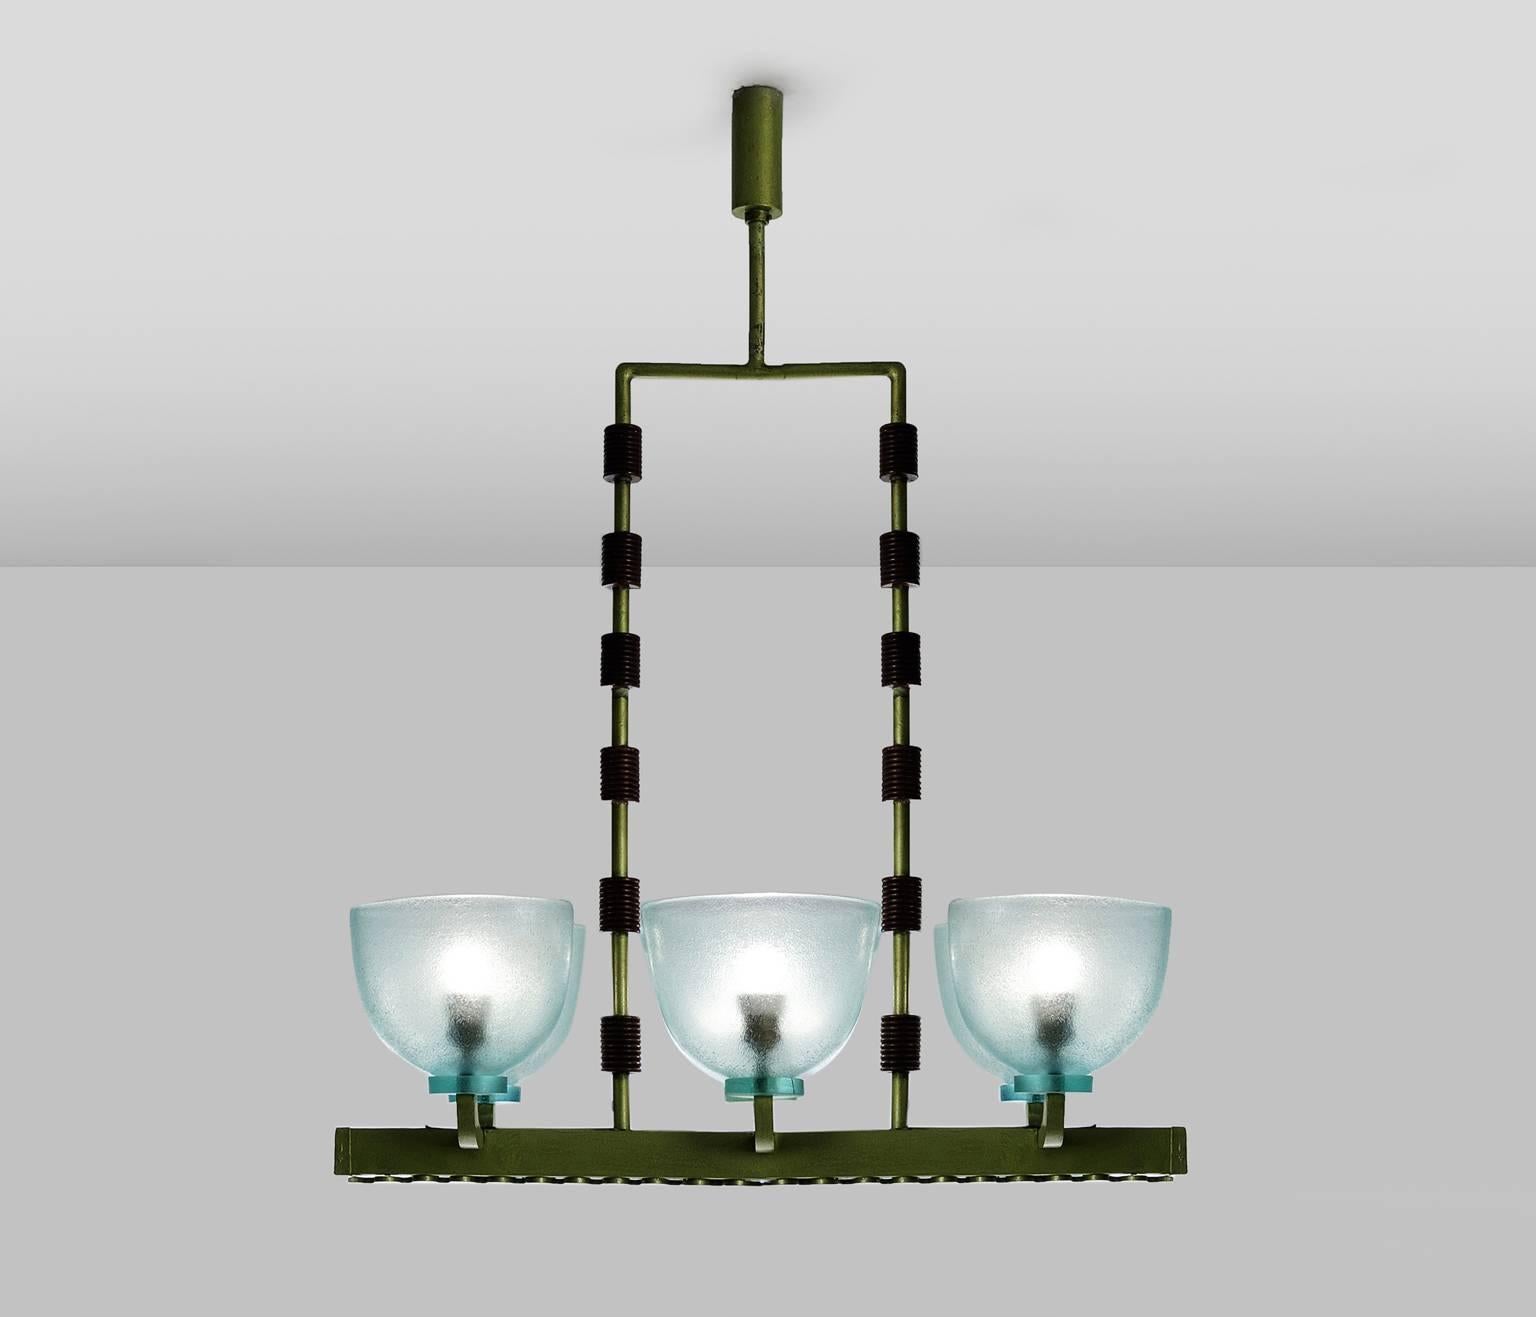 Chandelier in Murano glass, wood and metal by Seguso, Italy, 1940s. 

Large Murano glass chandelier by Seguso. This wonderful chandelier has a soft green frame in metal, with wooden decorative cylinder shaped elements onto the vertical tubular